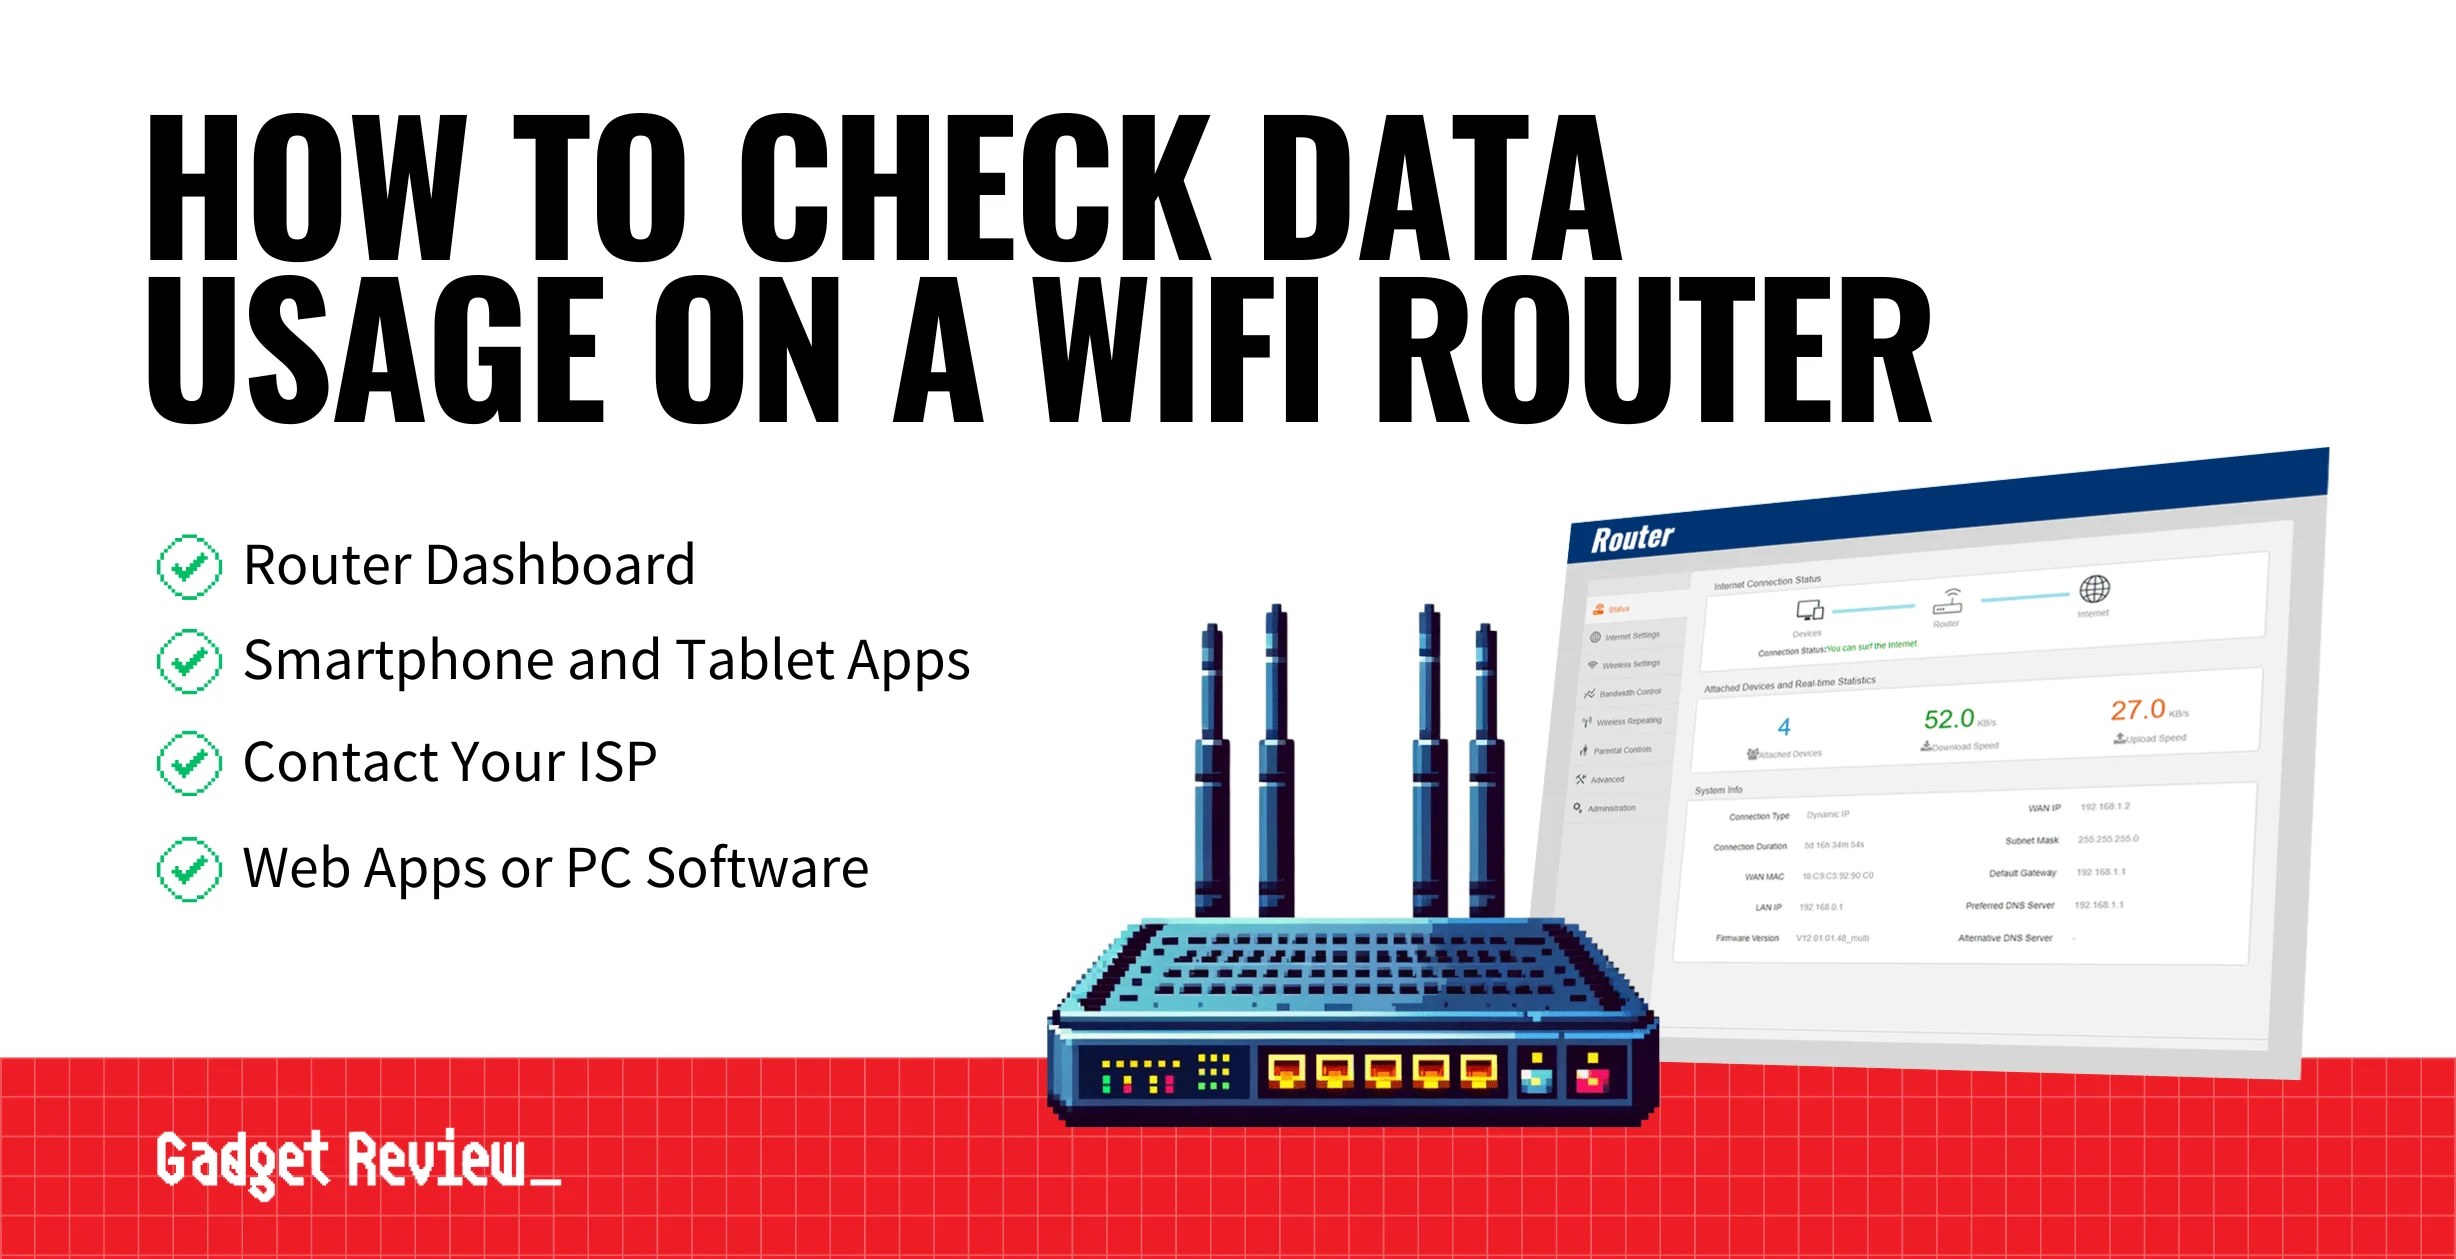 how to check data usage on wifi router guide